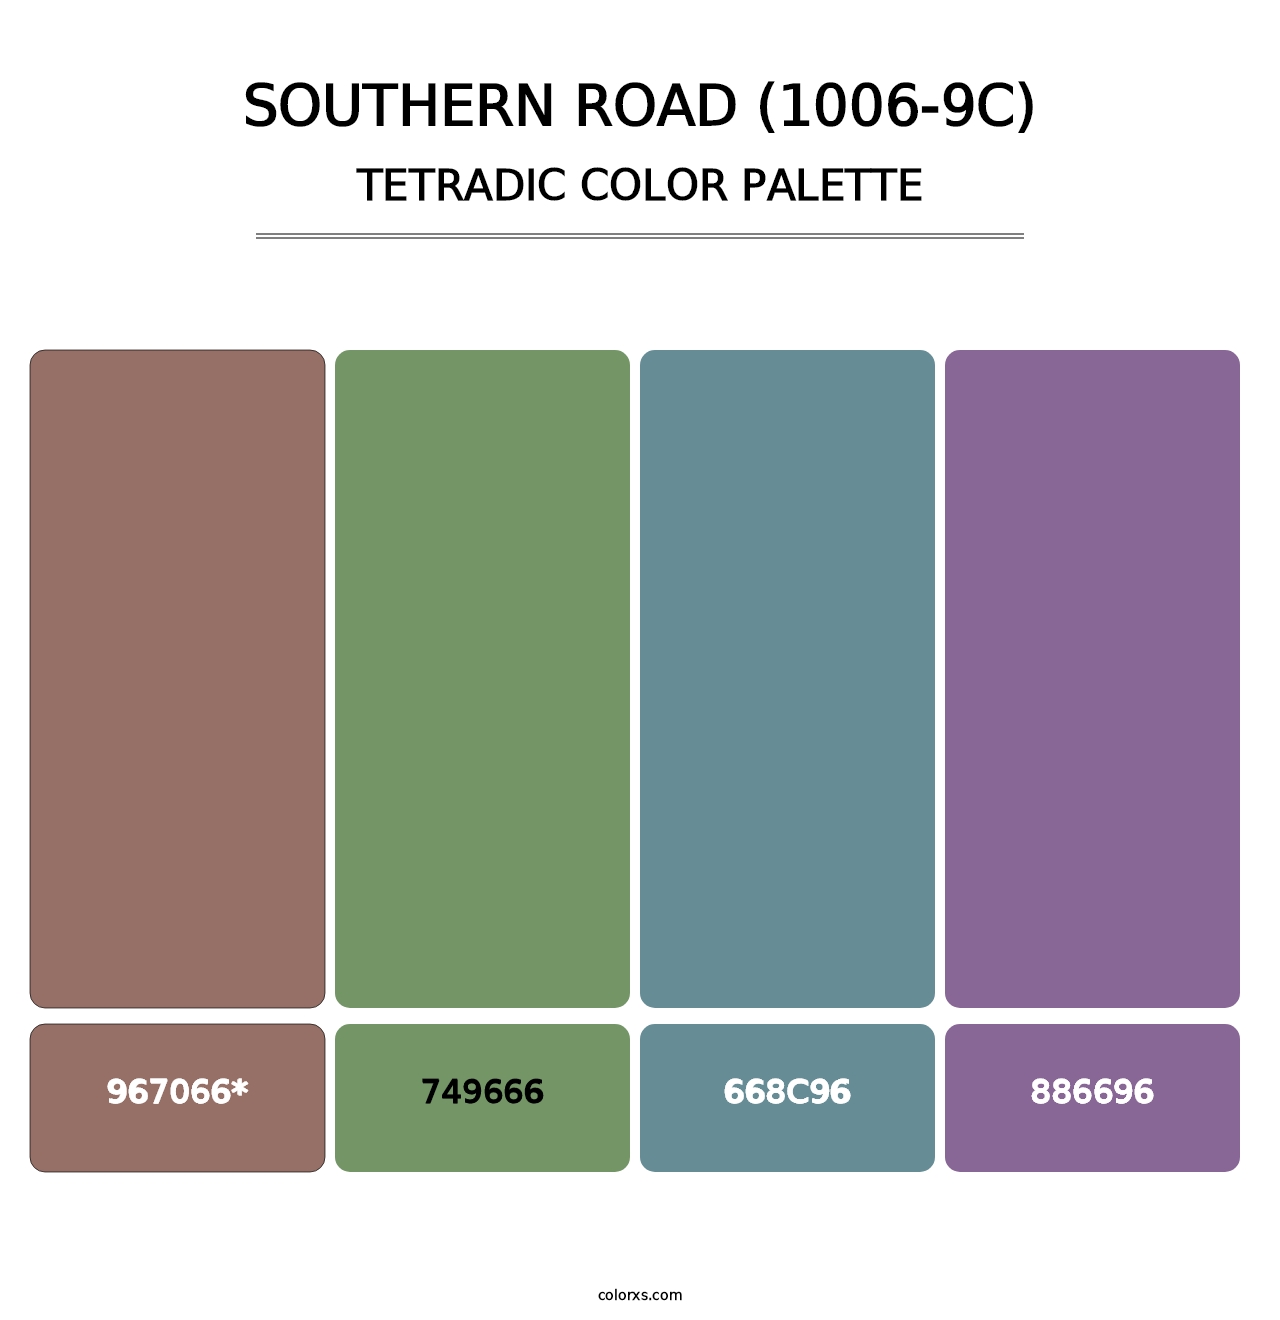 Southern Road (1006-9C) - Tetradic Color Palette